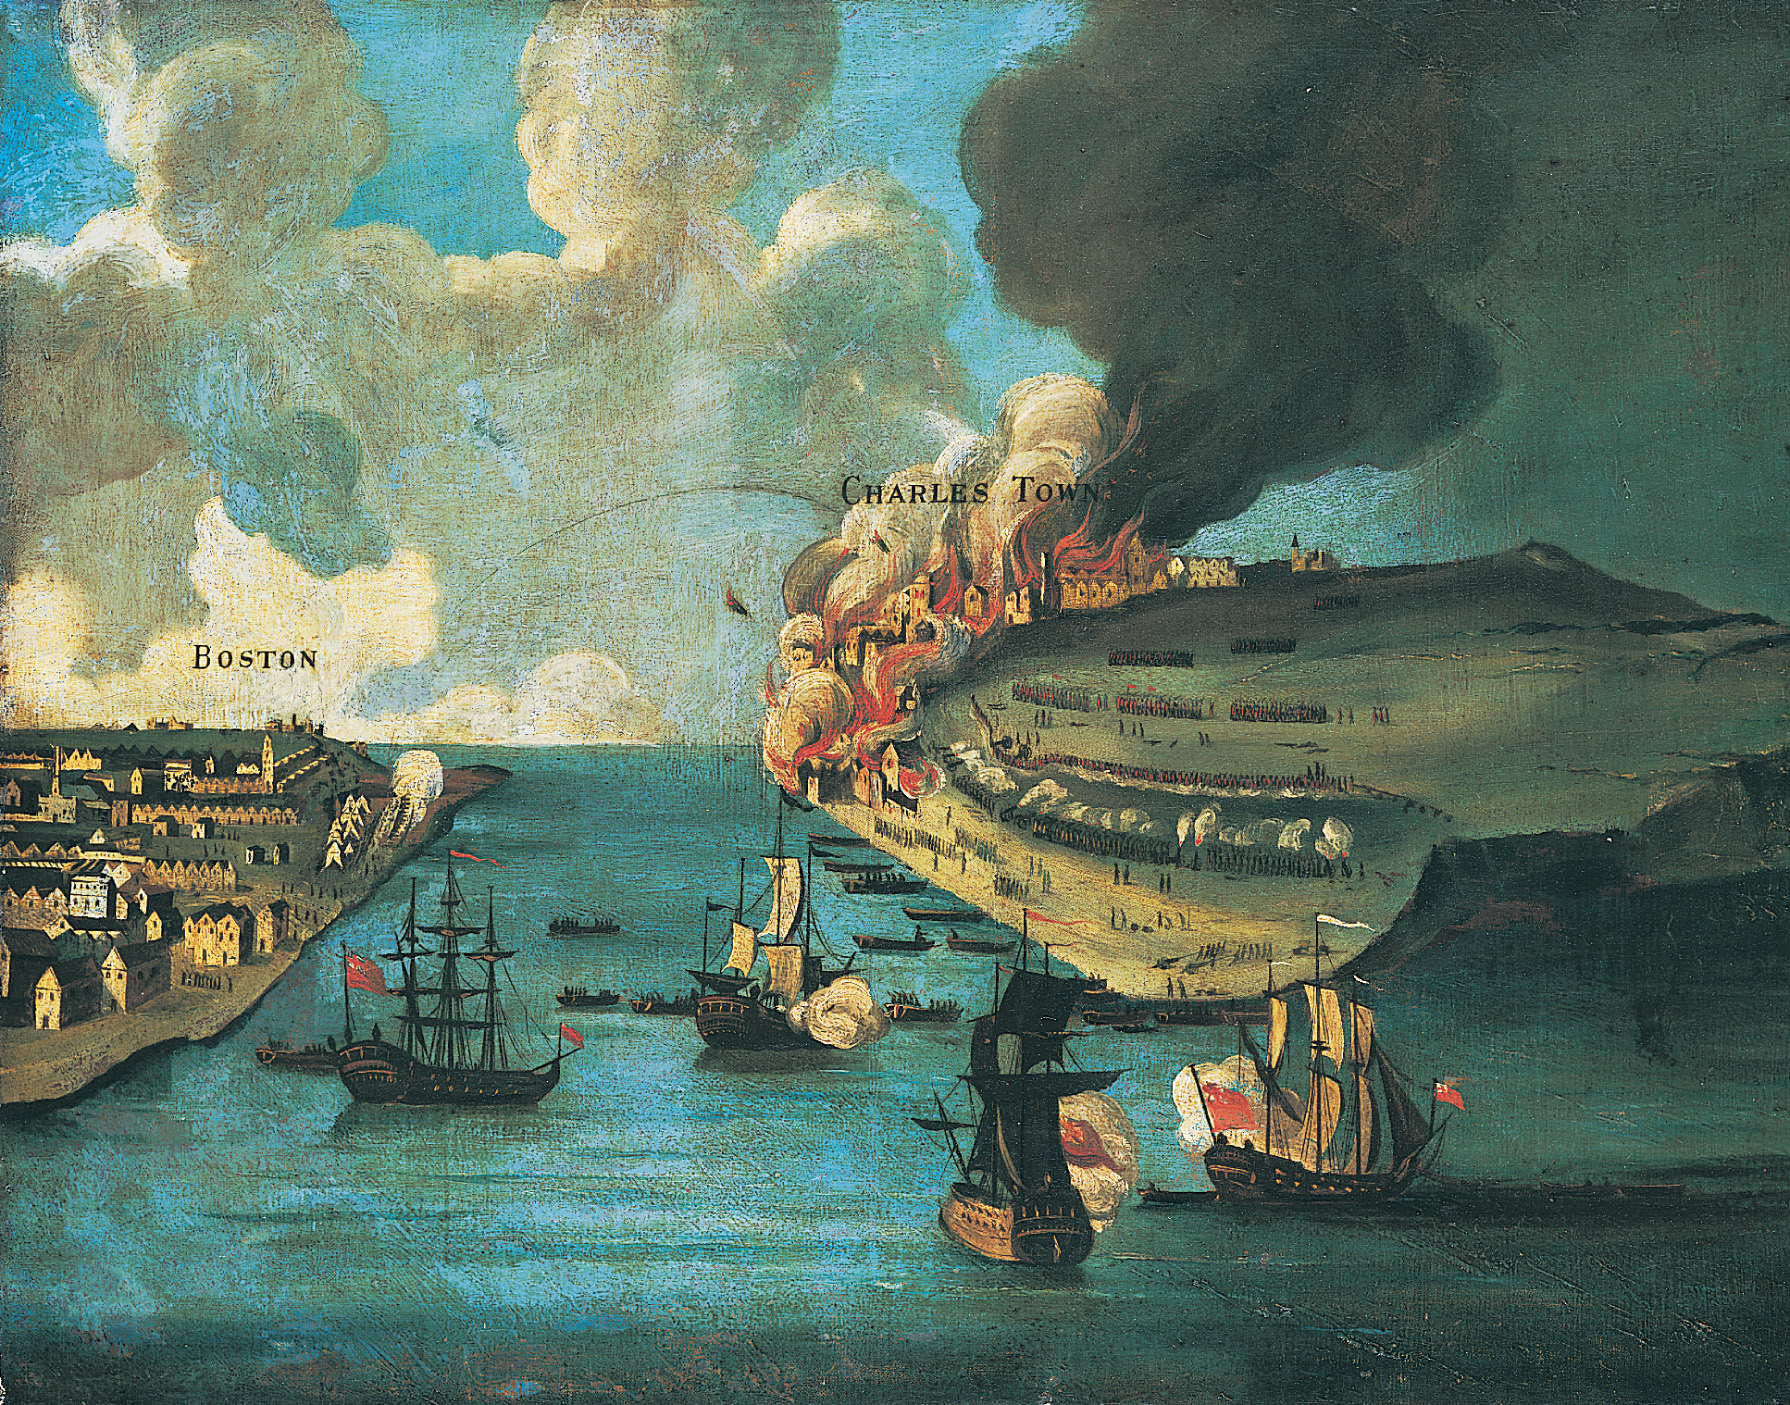 painting: Charles Town burns. Large ships in the water nearby fire their guns.